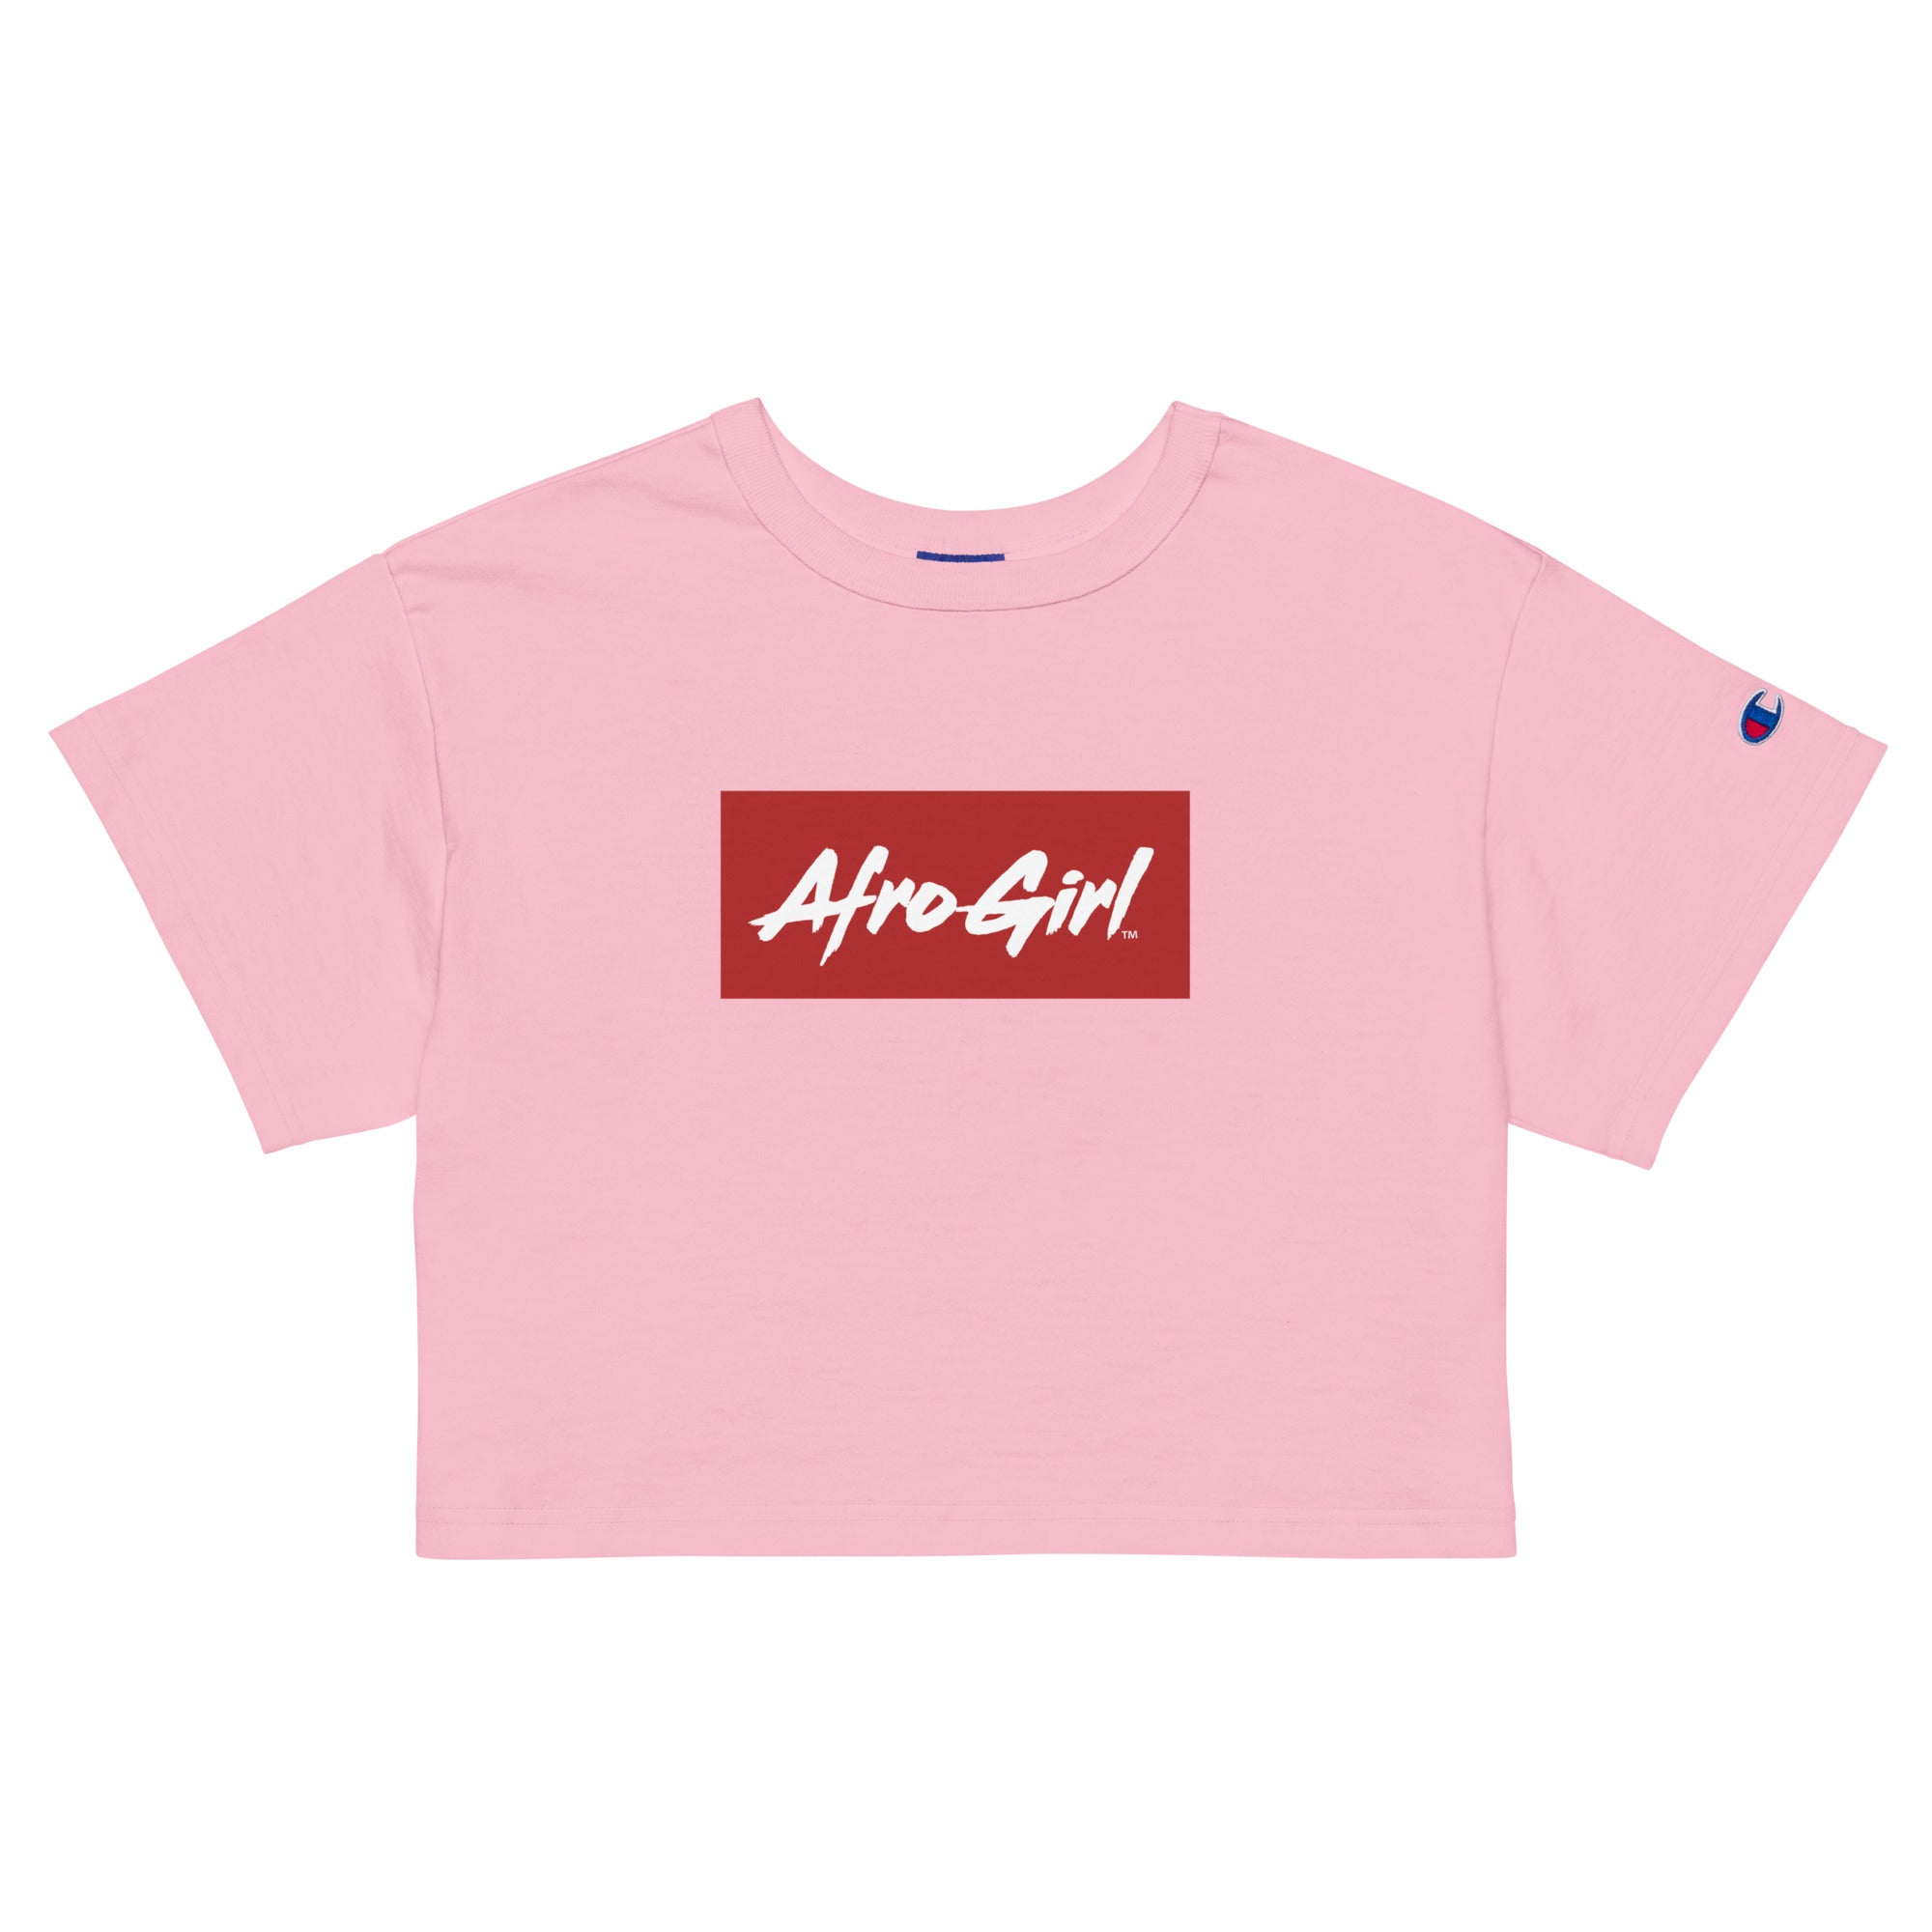 Afro Girl Champion crop top